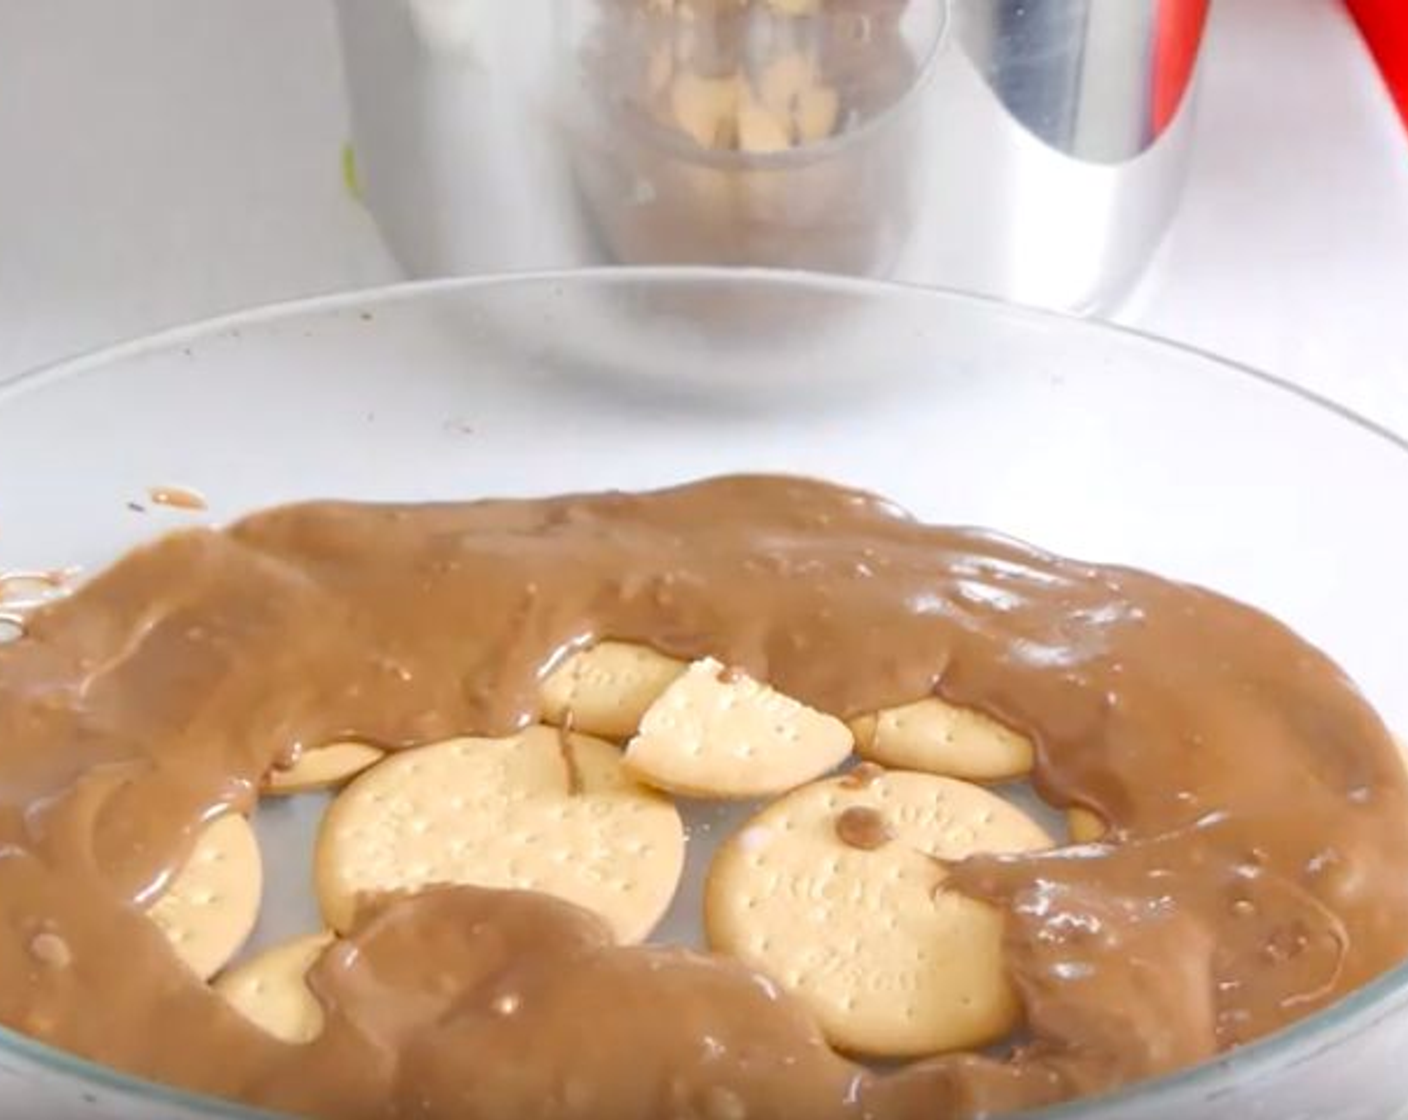 step 4 In a tray, start to build the layers of Digestive Biscuits (3 cups) and chocolate by dunking the biscuits in milk and placing them on the tray. Build the layers until finishing all the ingredients leaving some chocolate for the top.